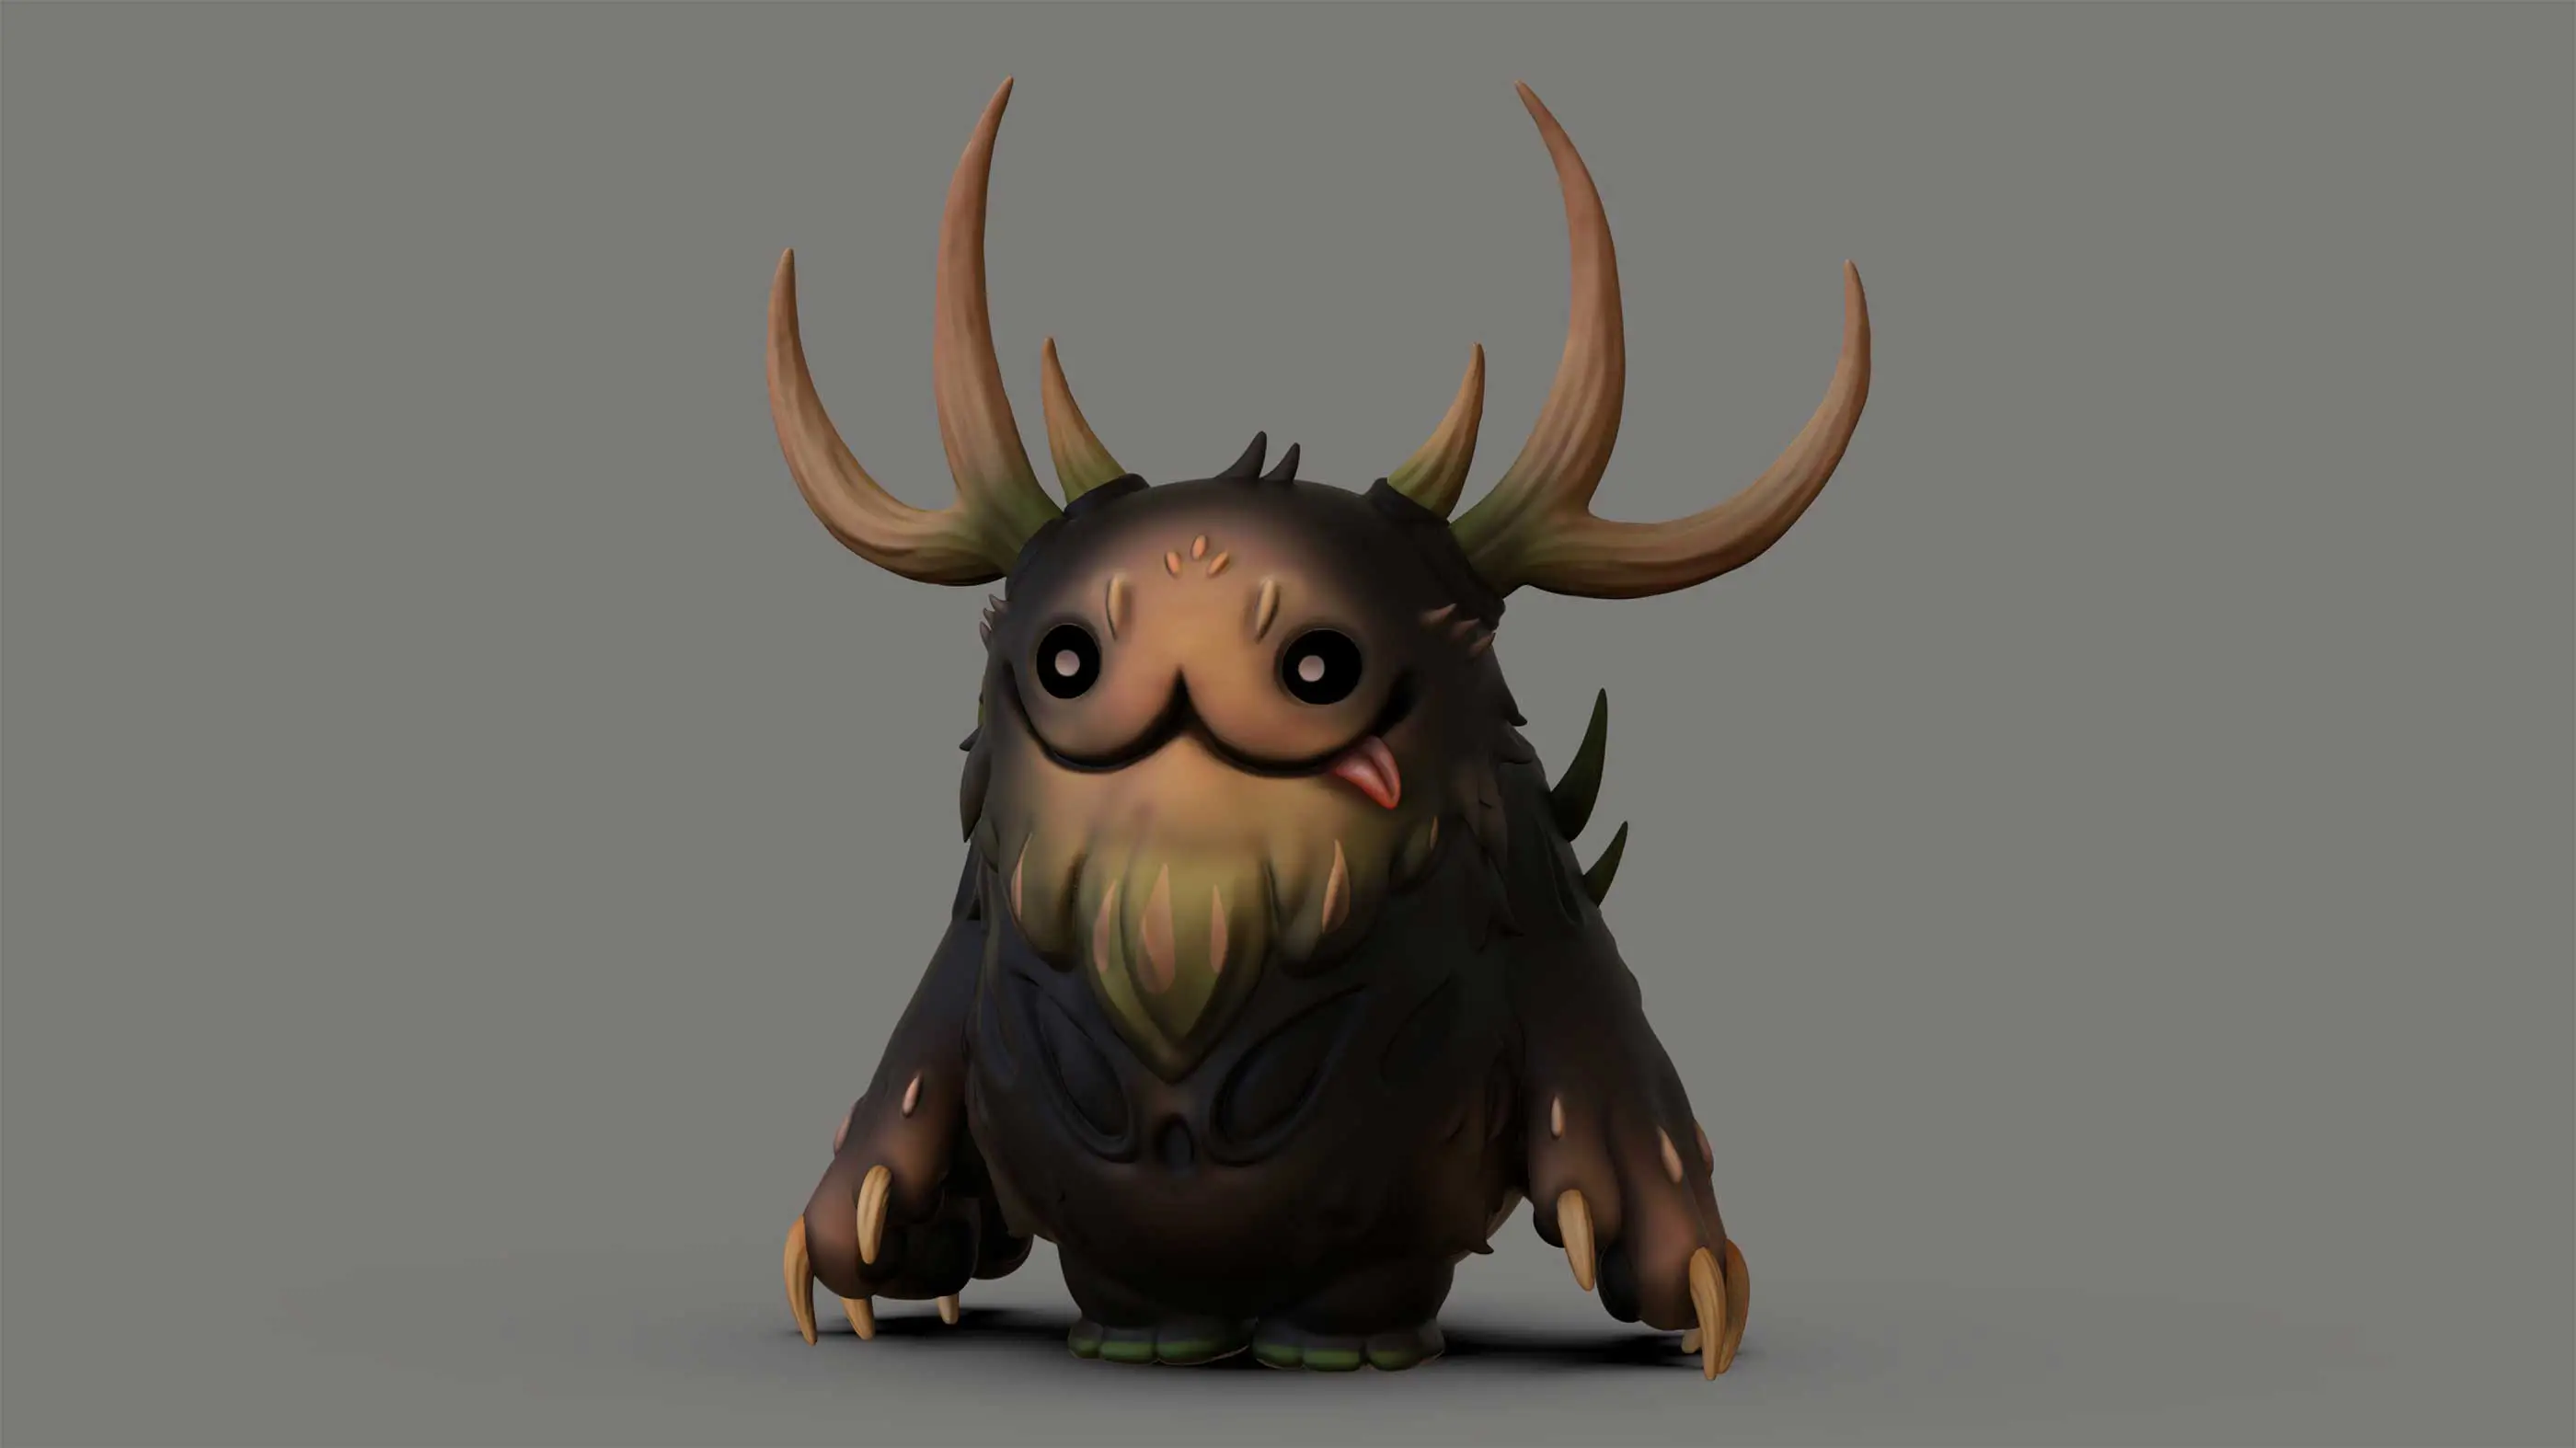 A 3D render of a small furry creature with antlers.